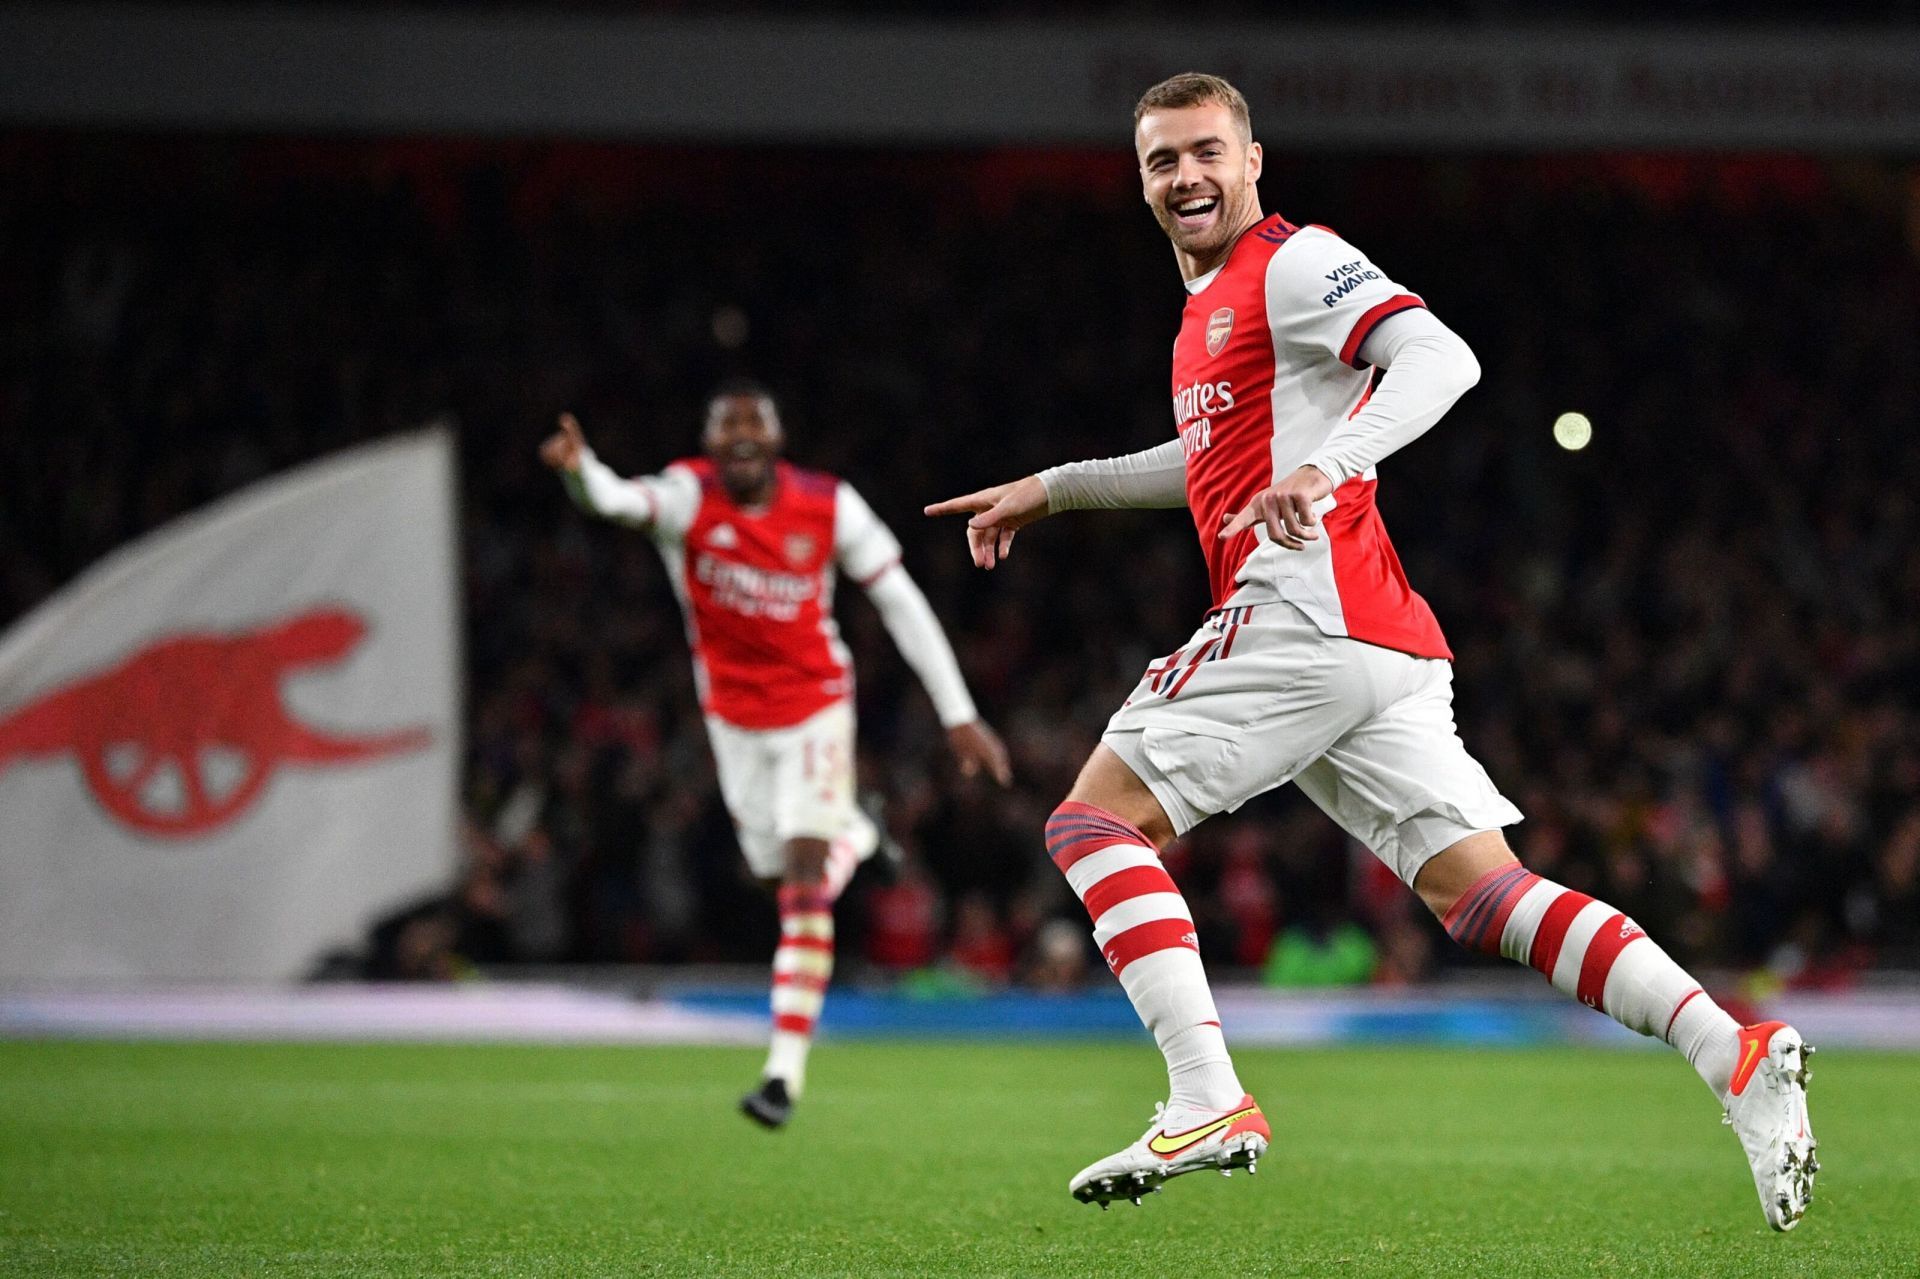 Callum Chambers scored his first Arsenal goal in two years